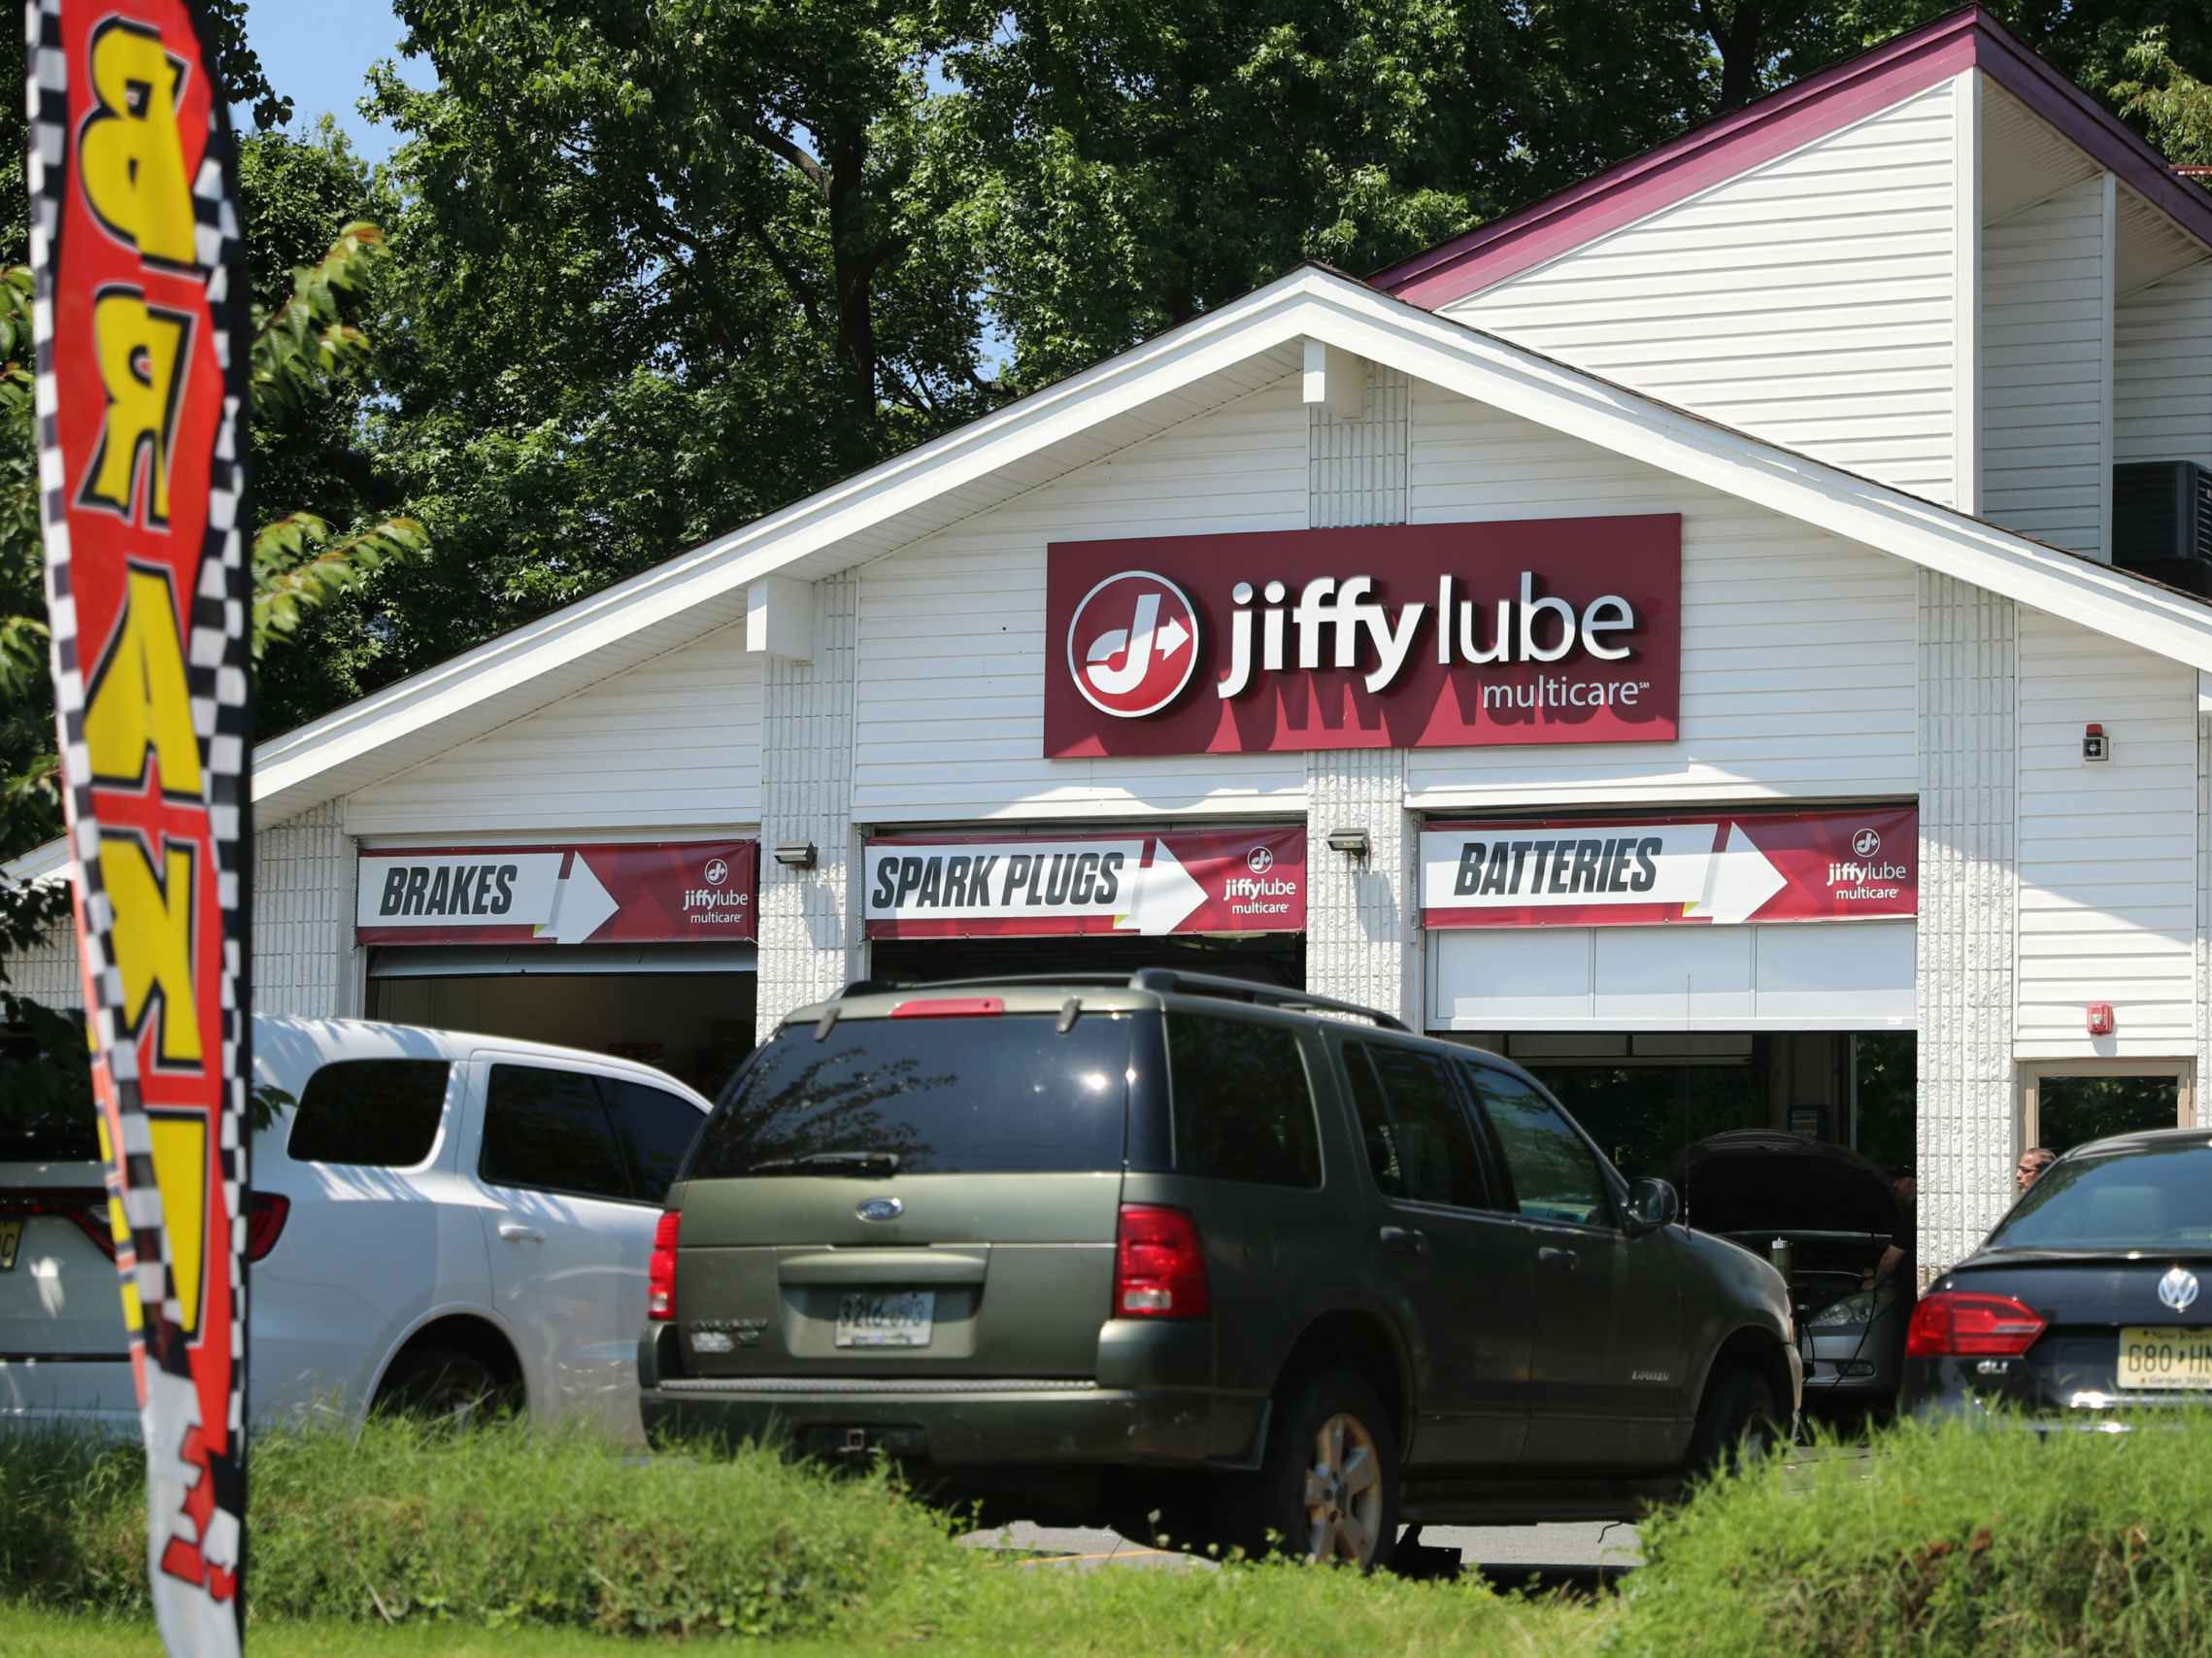 A Jiffy Lube store front